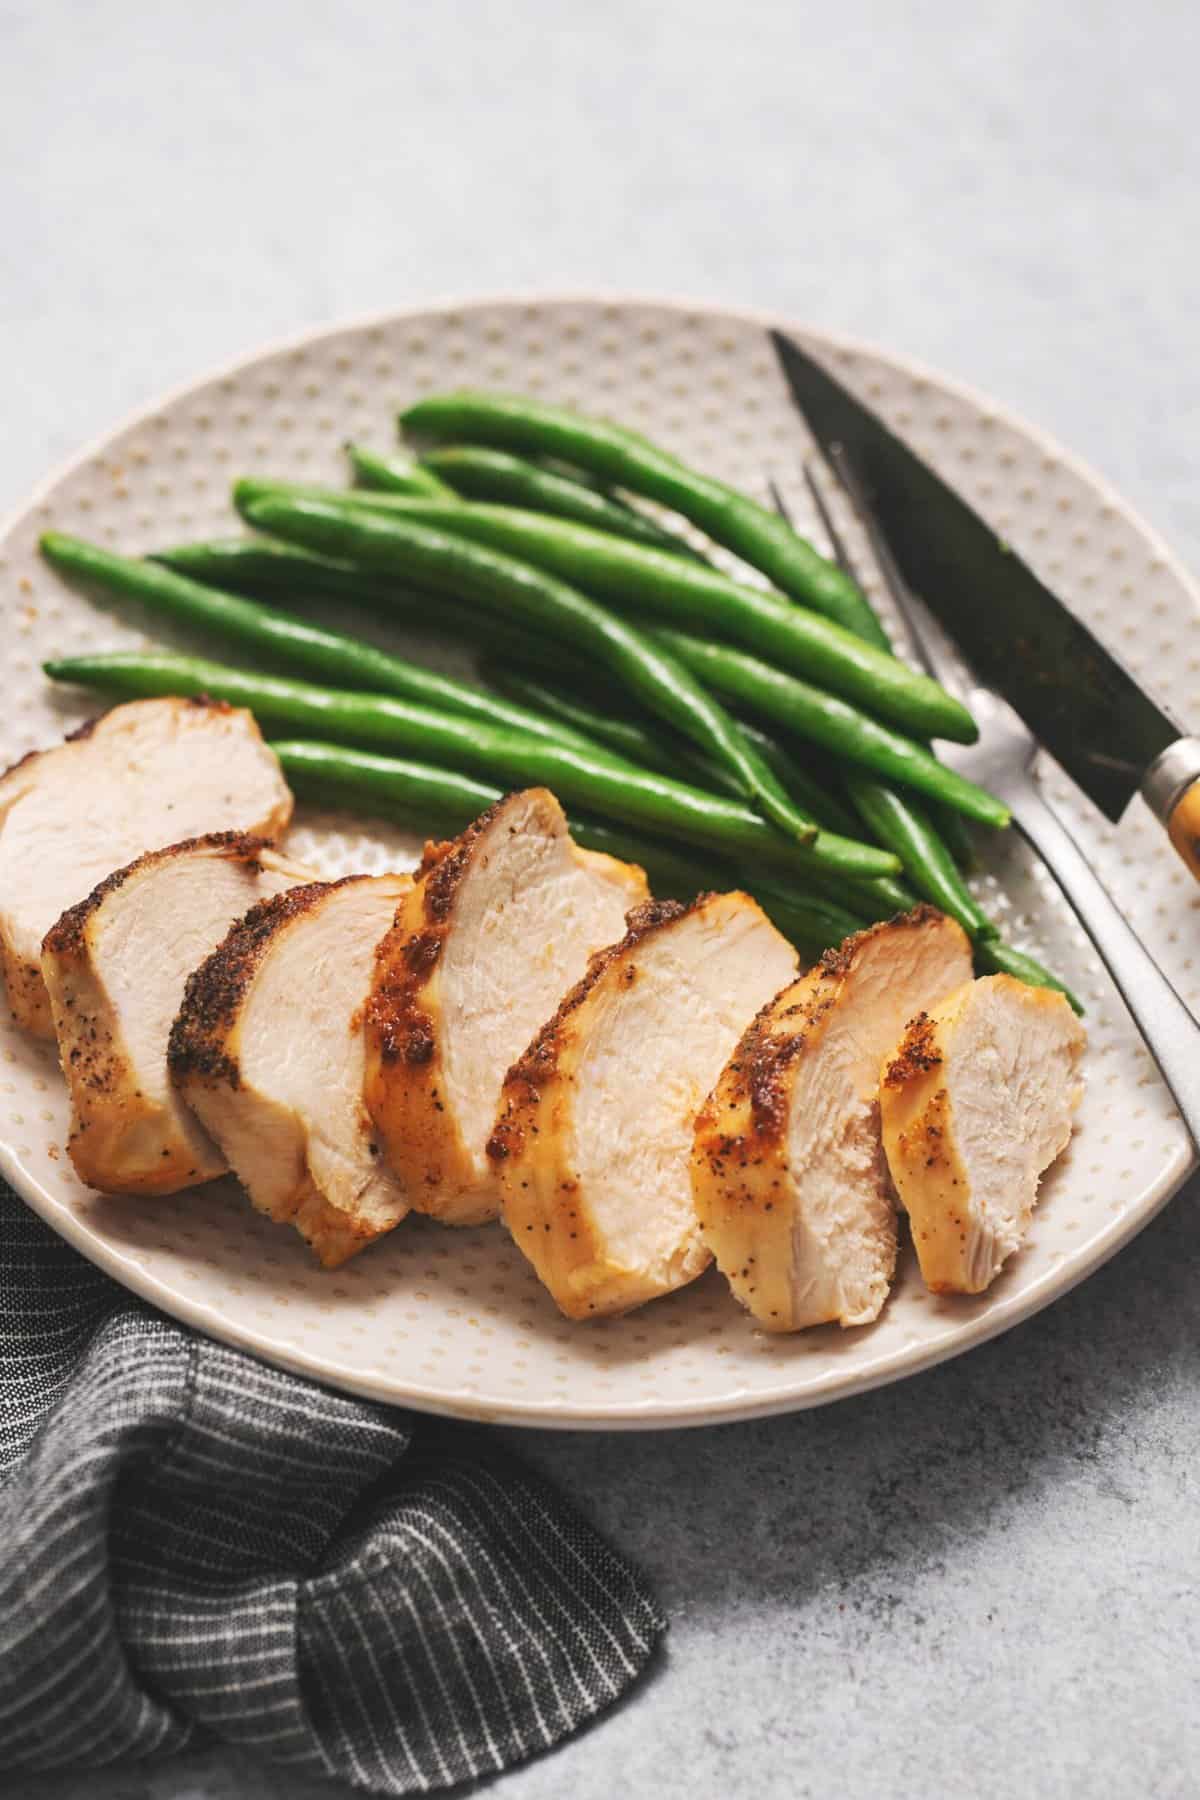 sliced chicken breast on a plate with green beans and knife